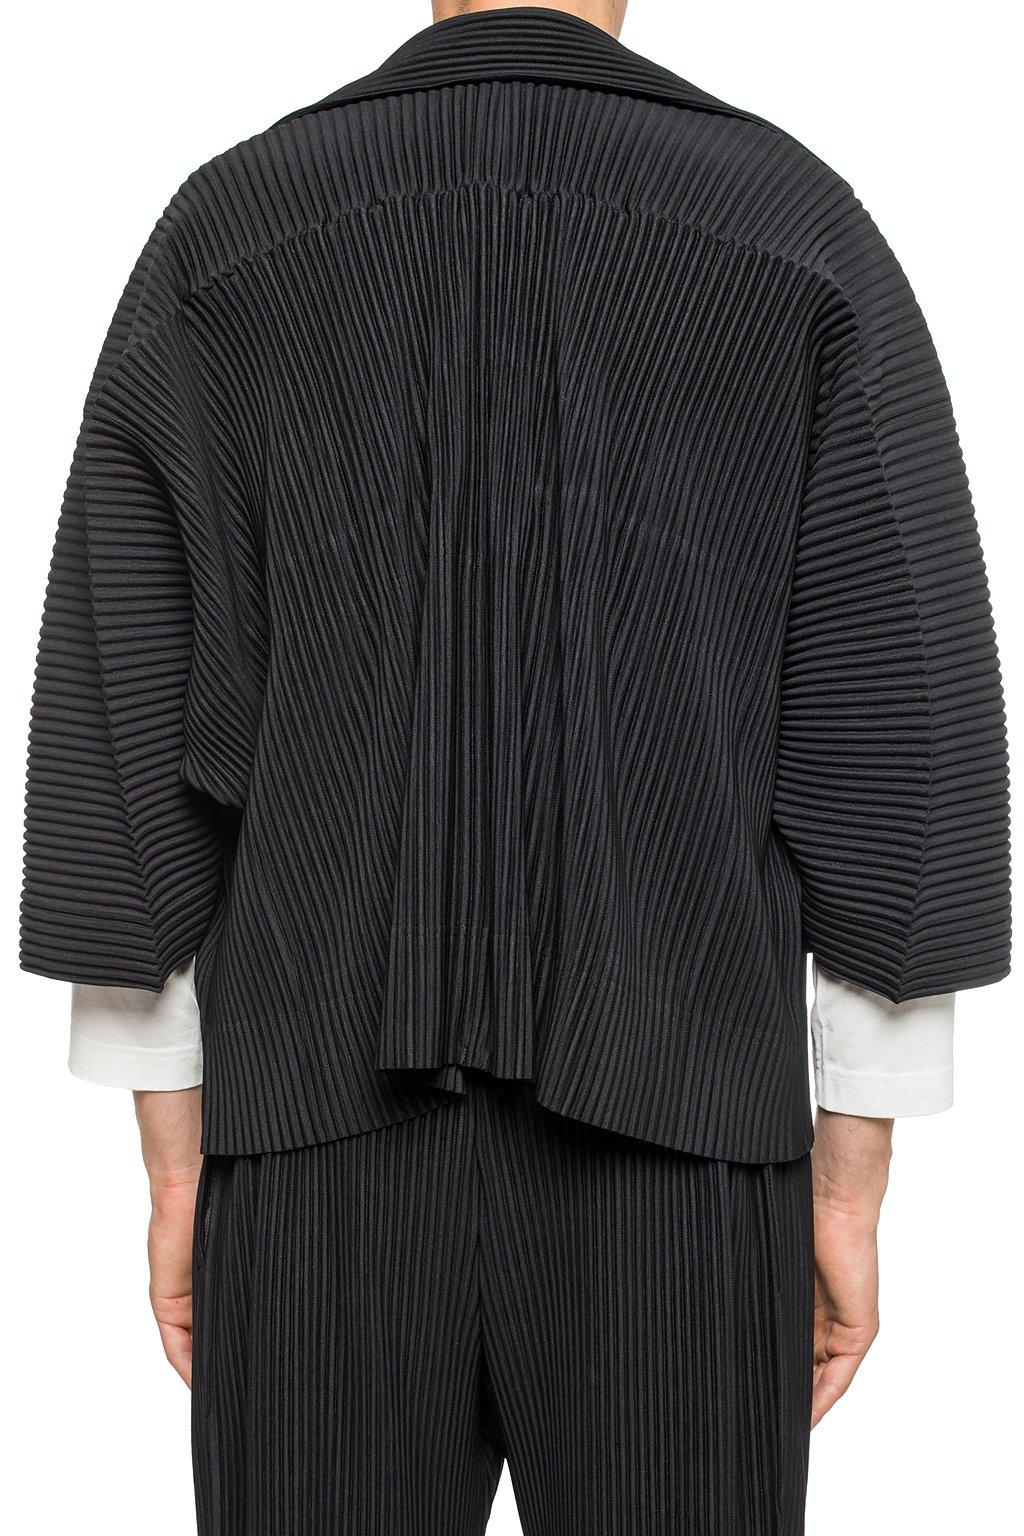 Issey Miyake Synthetic Ribbed Jacket With A Collar in Black for Men - Lyst